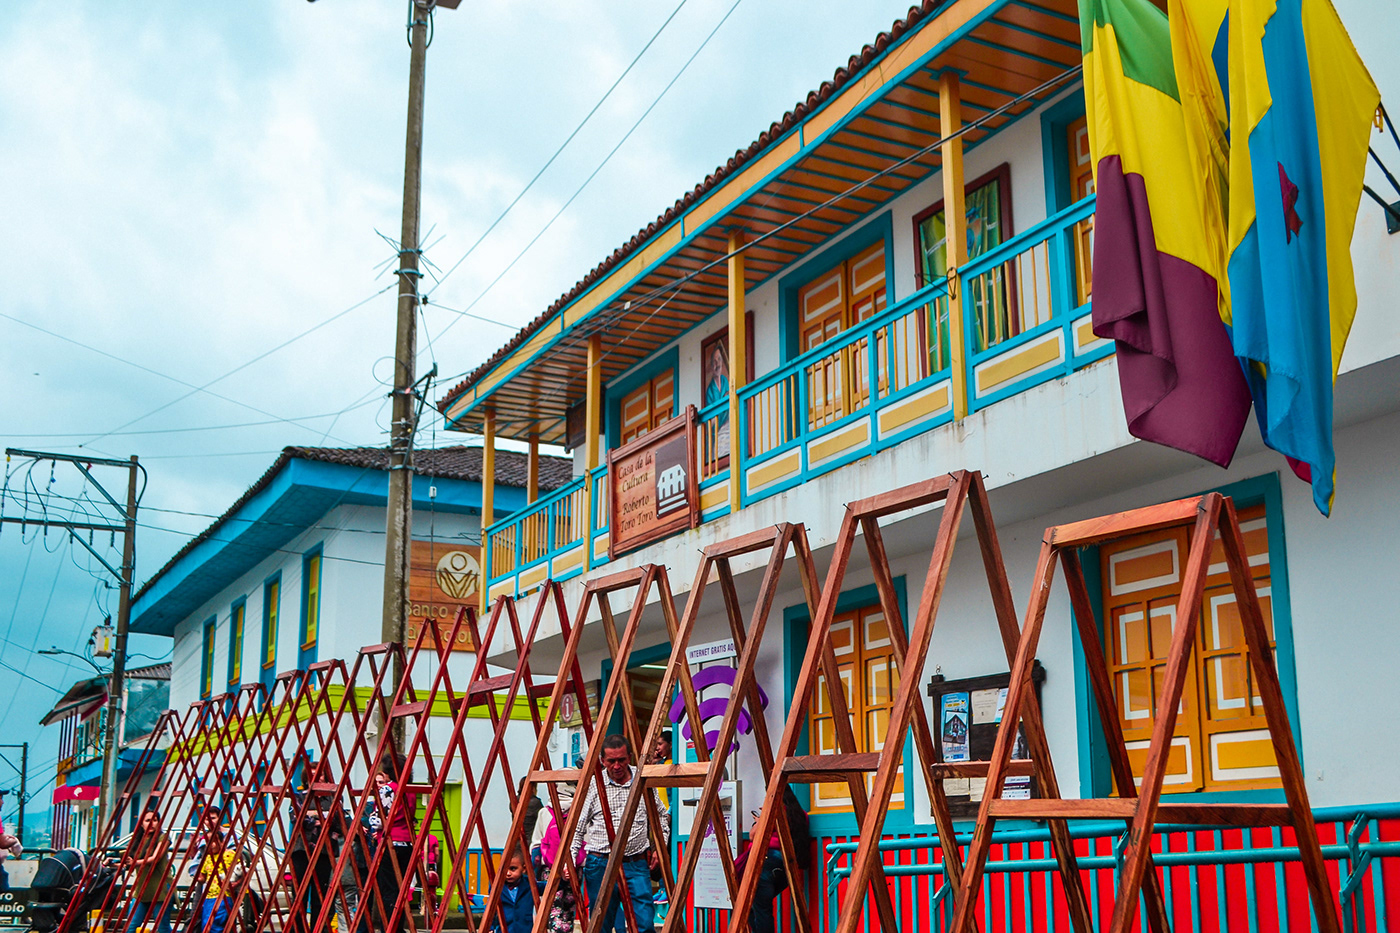 #travel #salento #colombia #colorful #nature #mountains #facades #traditional #coffee #photography #trip